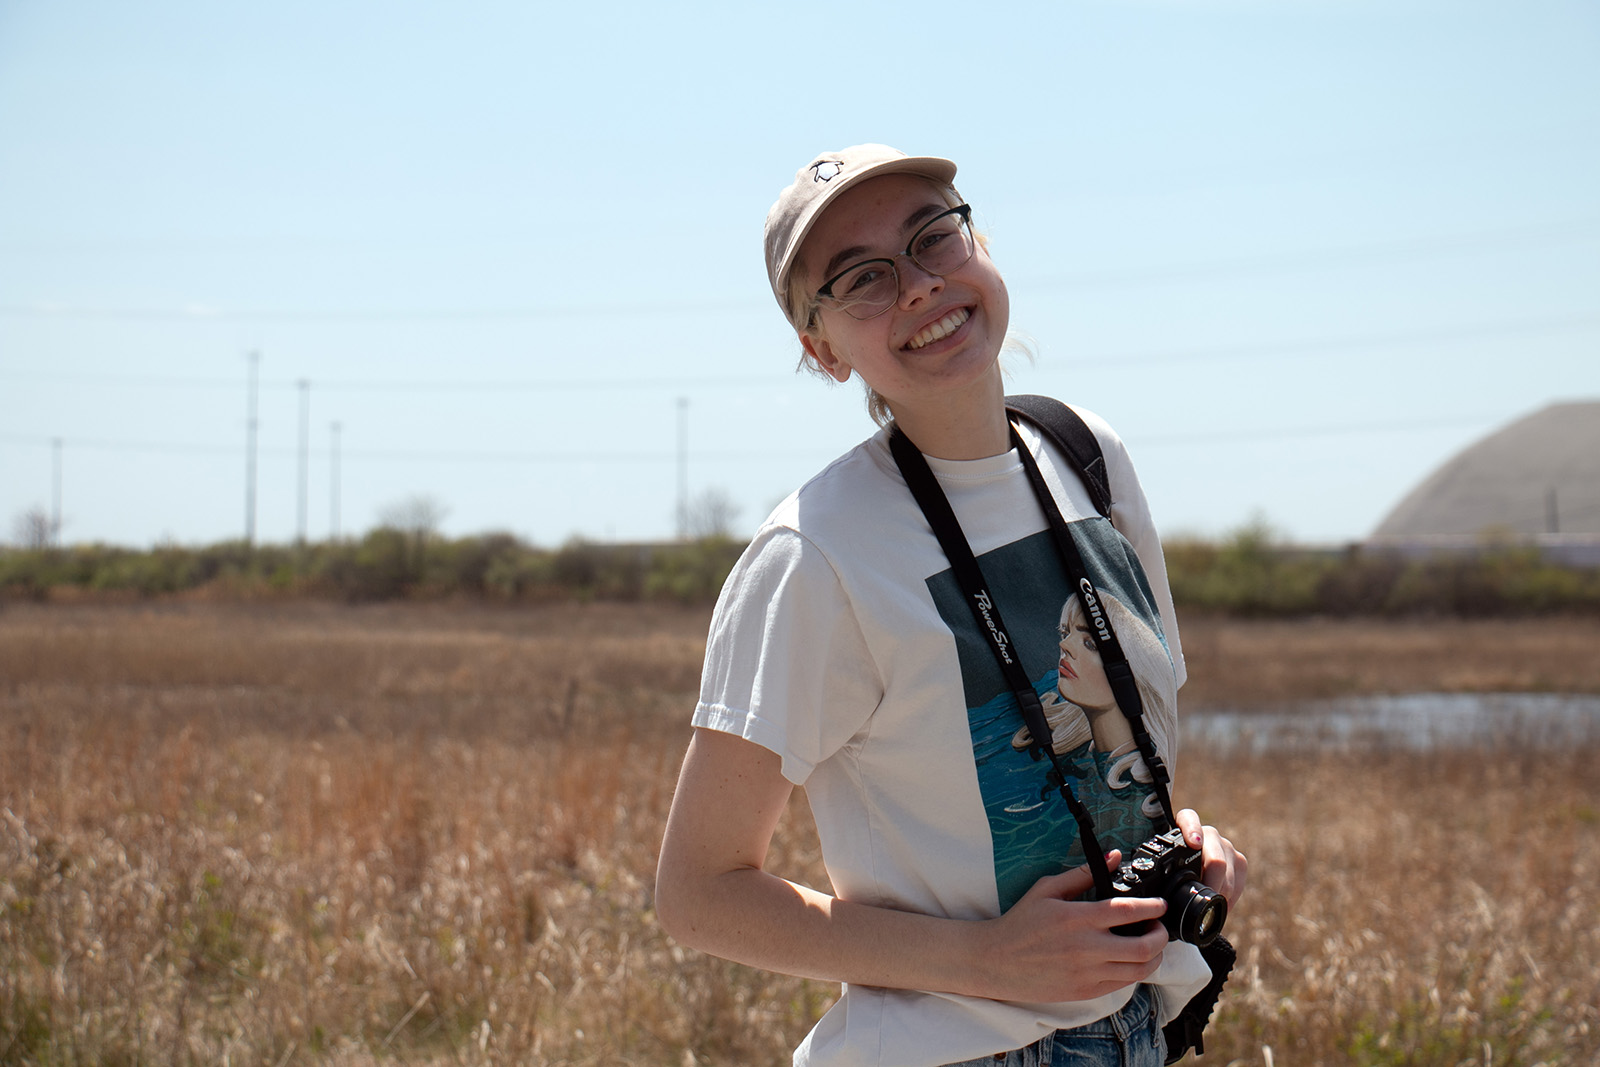 A young woman stands outside in a field while holding a camera that hangs from a neck strap she is wearing.